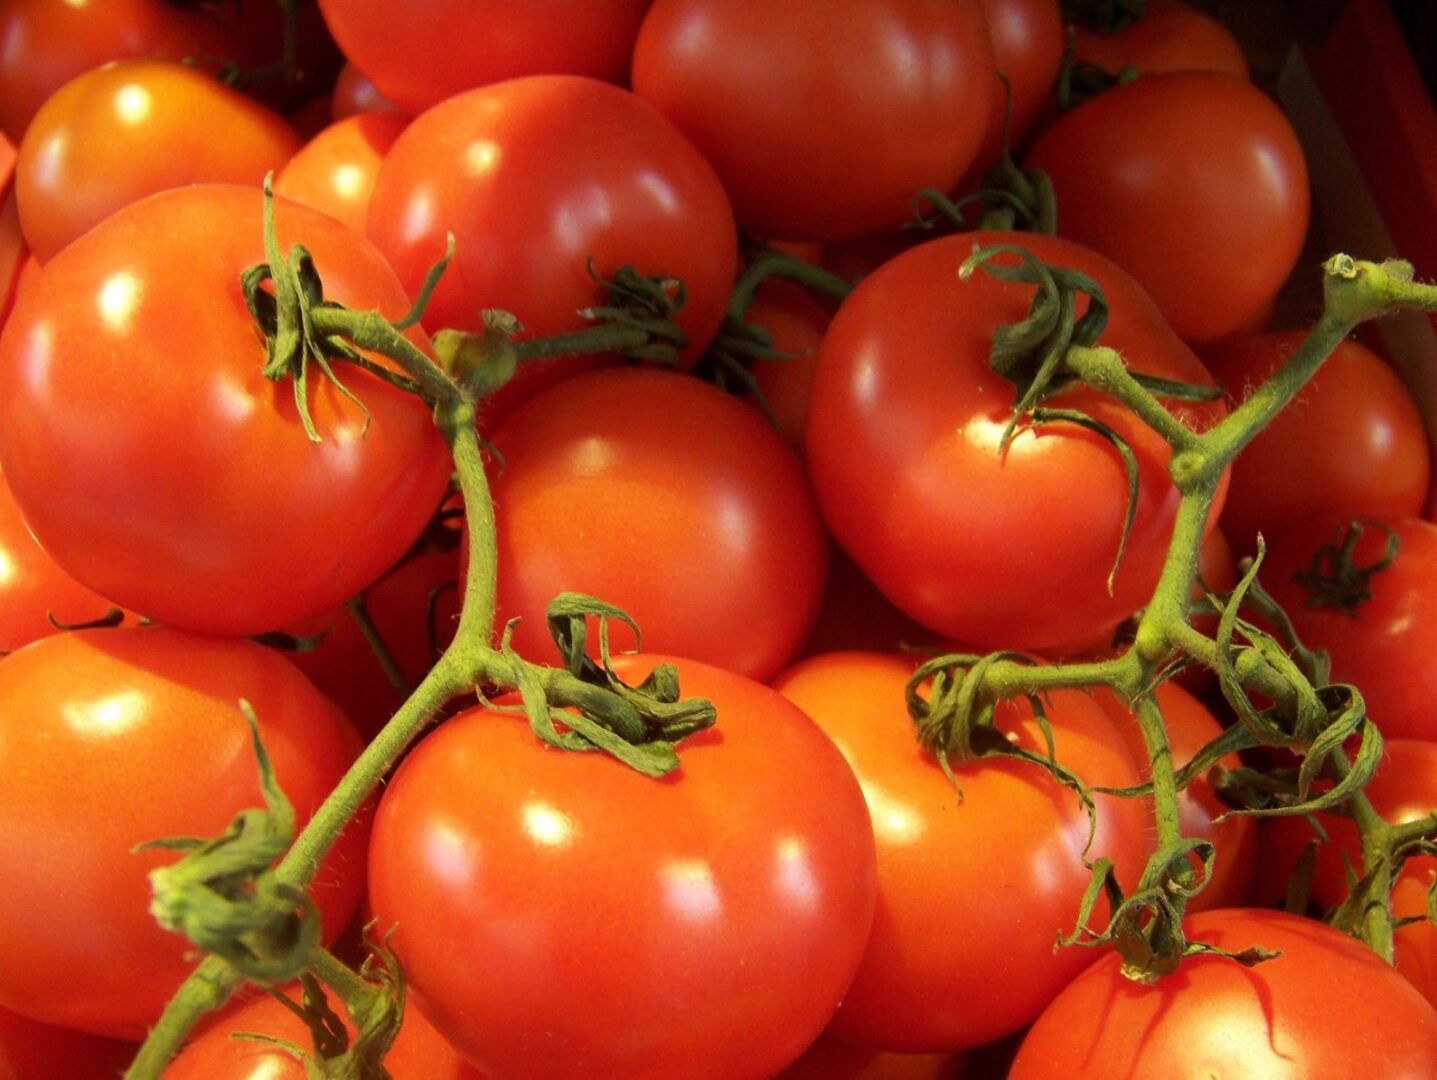 A pile of tomatoes that are red and green.